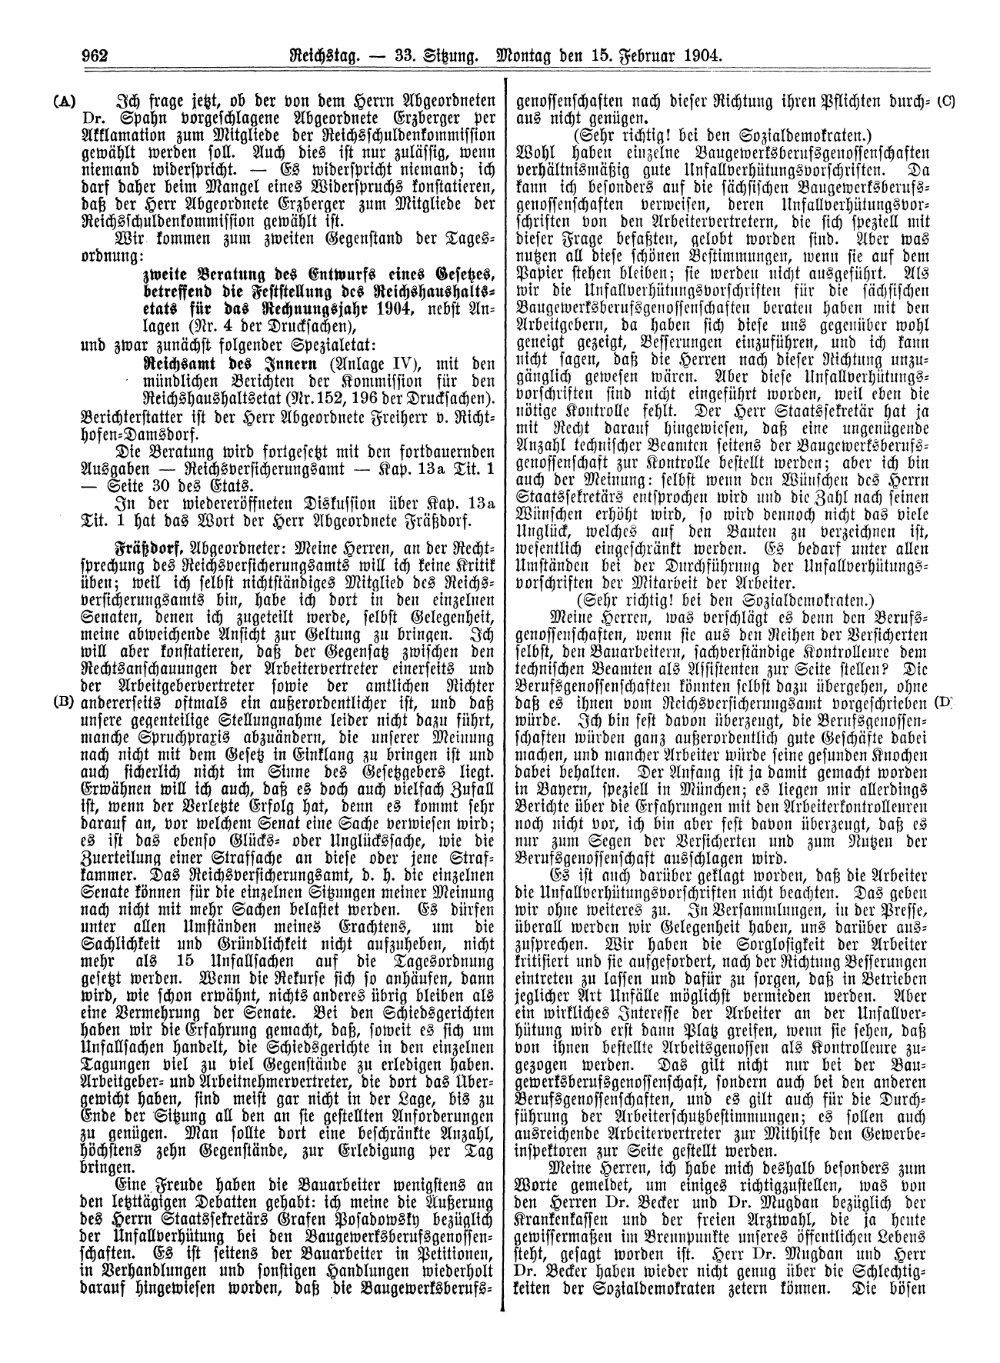 Scan of page 962